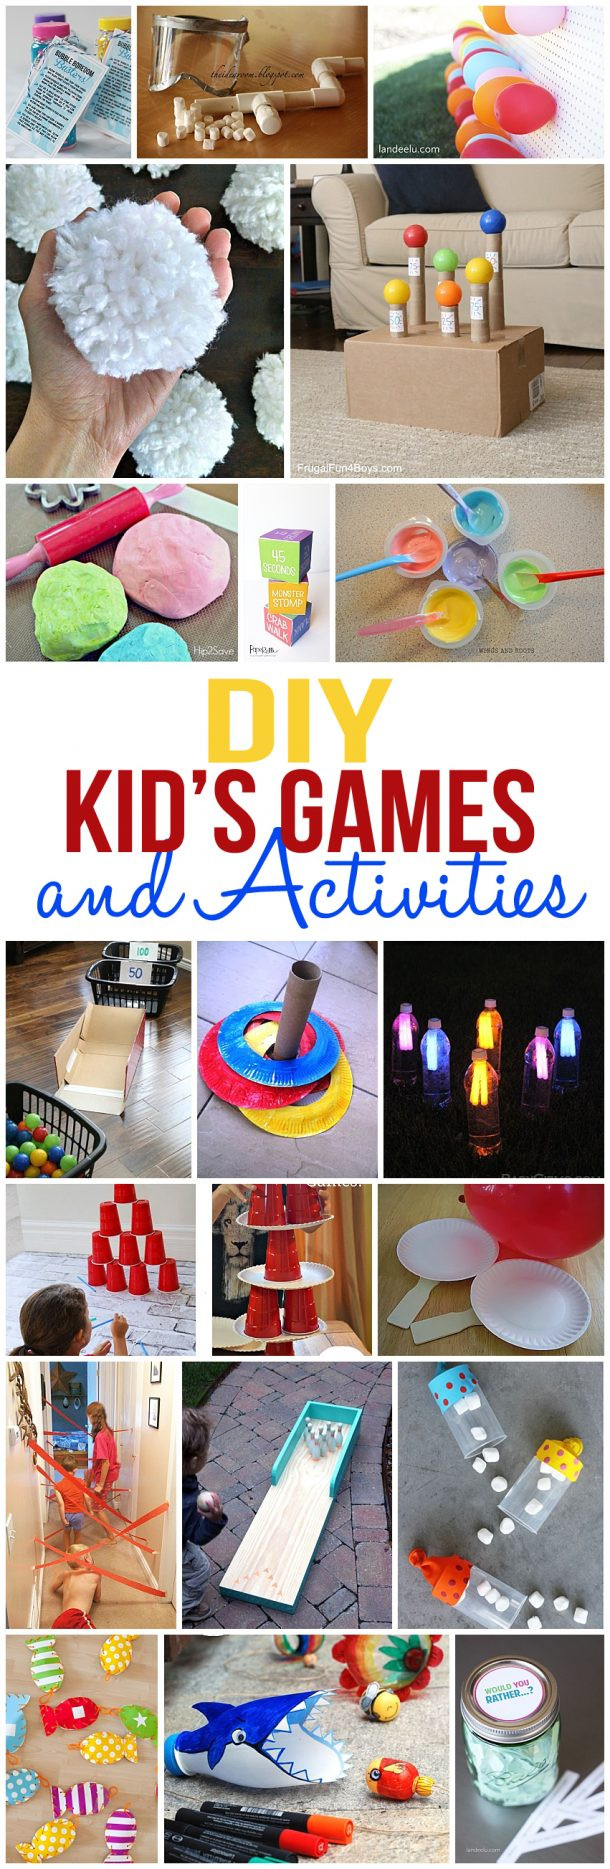 DIY Kids Games
 DIY Kids Games and Activities for Indoors or Outdoors